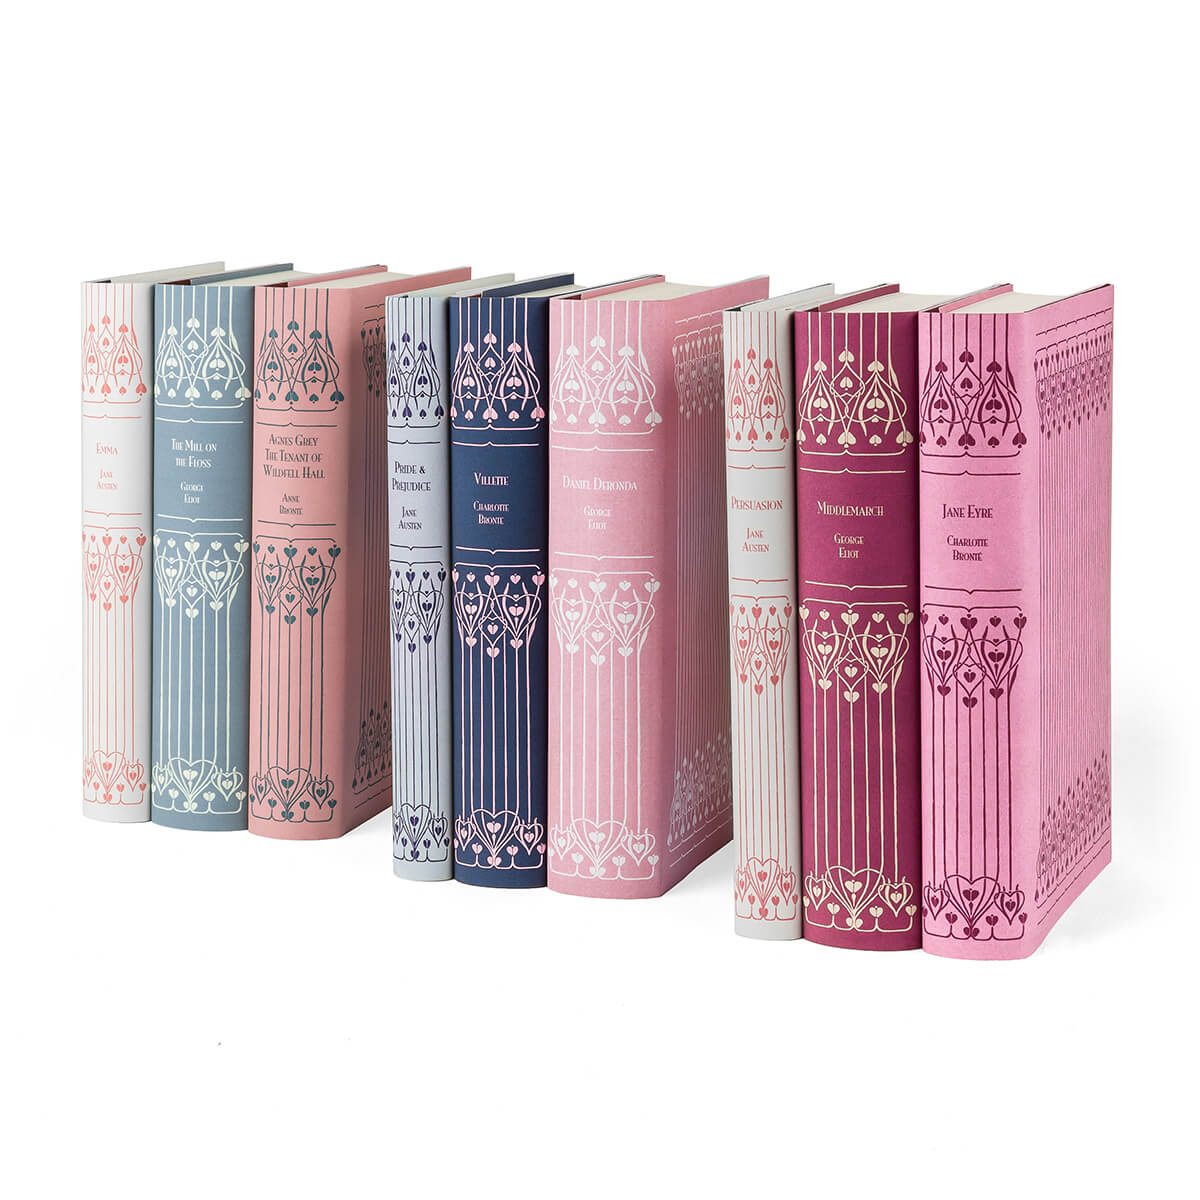 Each book included is a clothbound Everyman's Library edition, wrapped in custom-printed jackets inspired by the look of Victorian bindings. Choose from sets of three in the curated colorways Vintage Rose, London Fog, and Midnight Navy, or purchase the complete set of all nine!